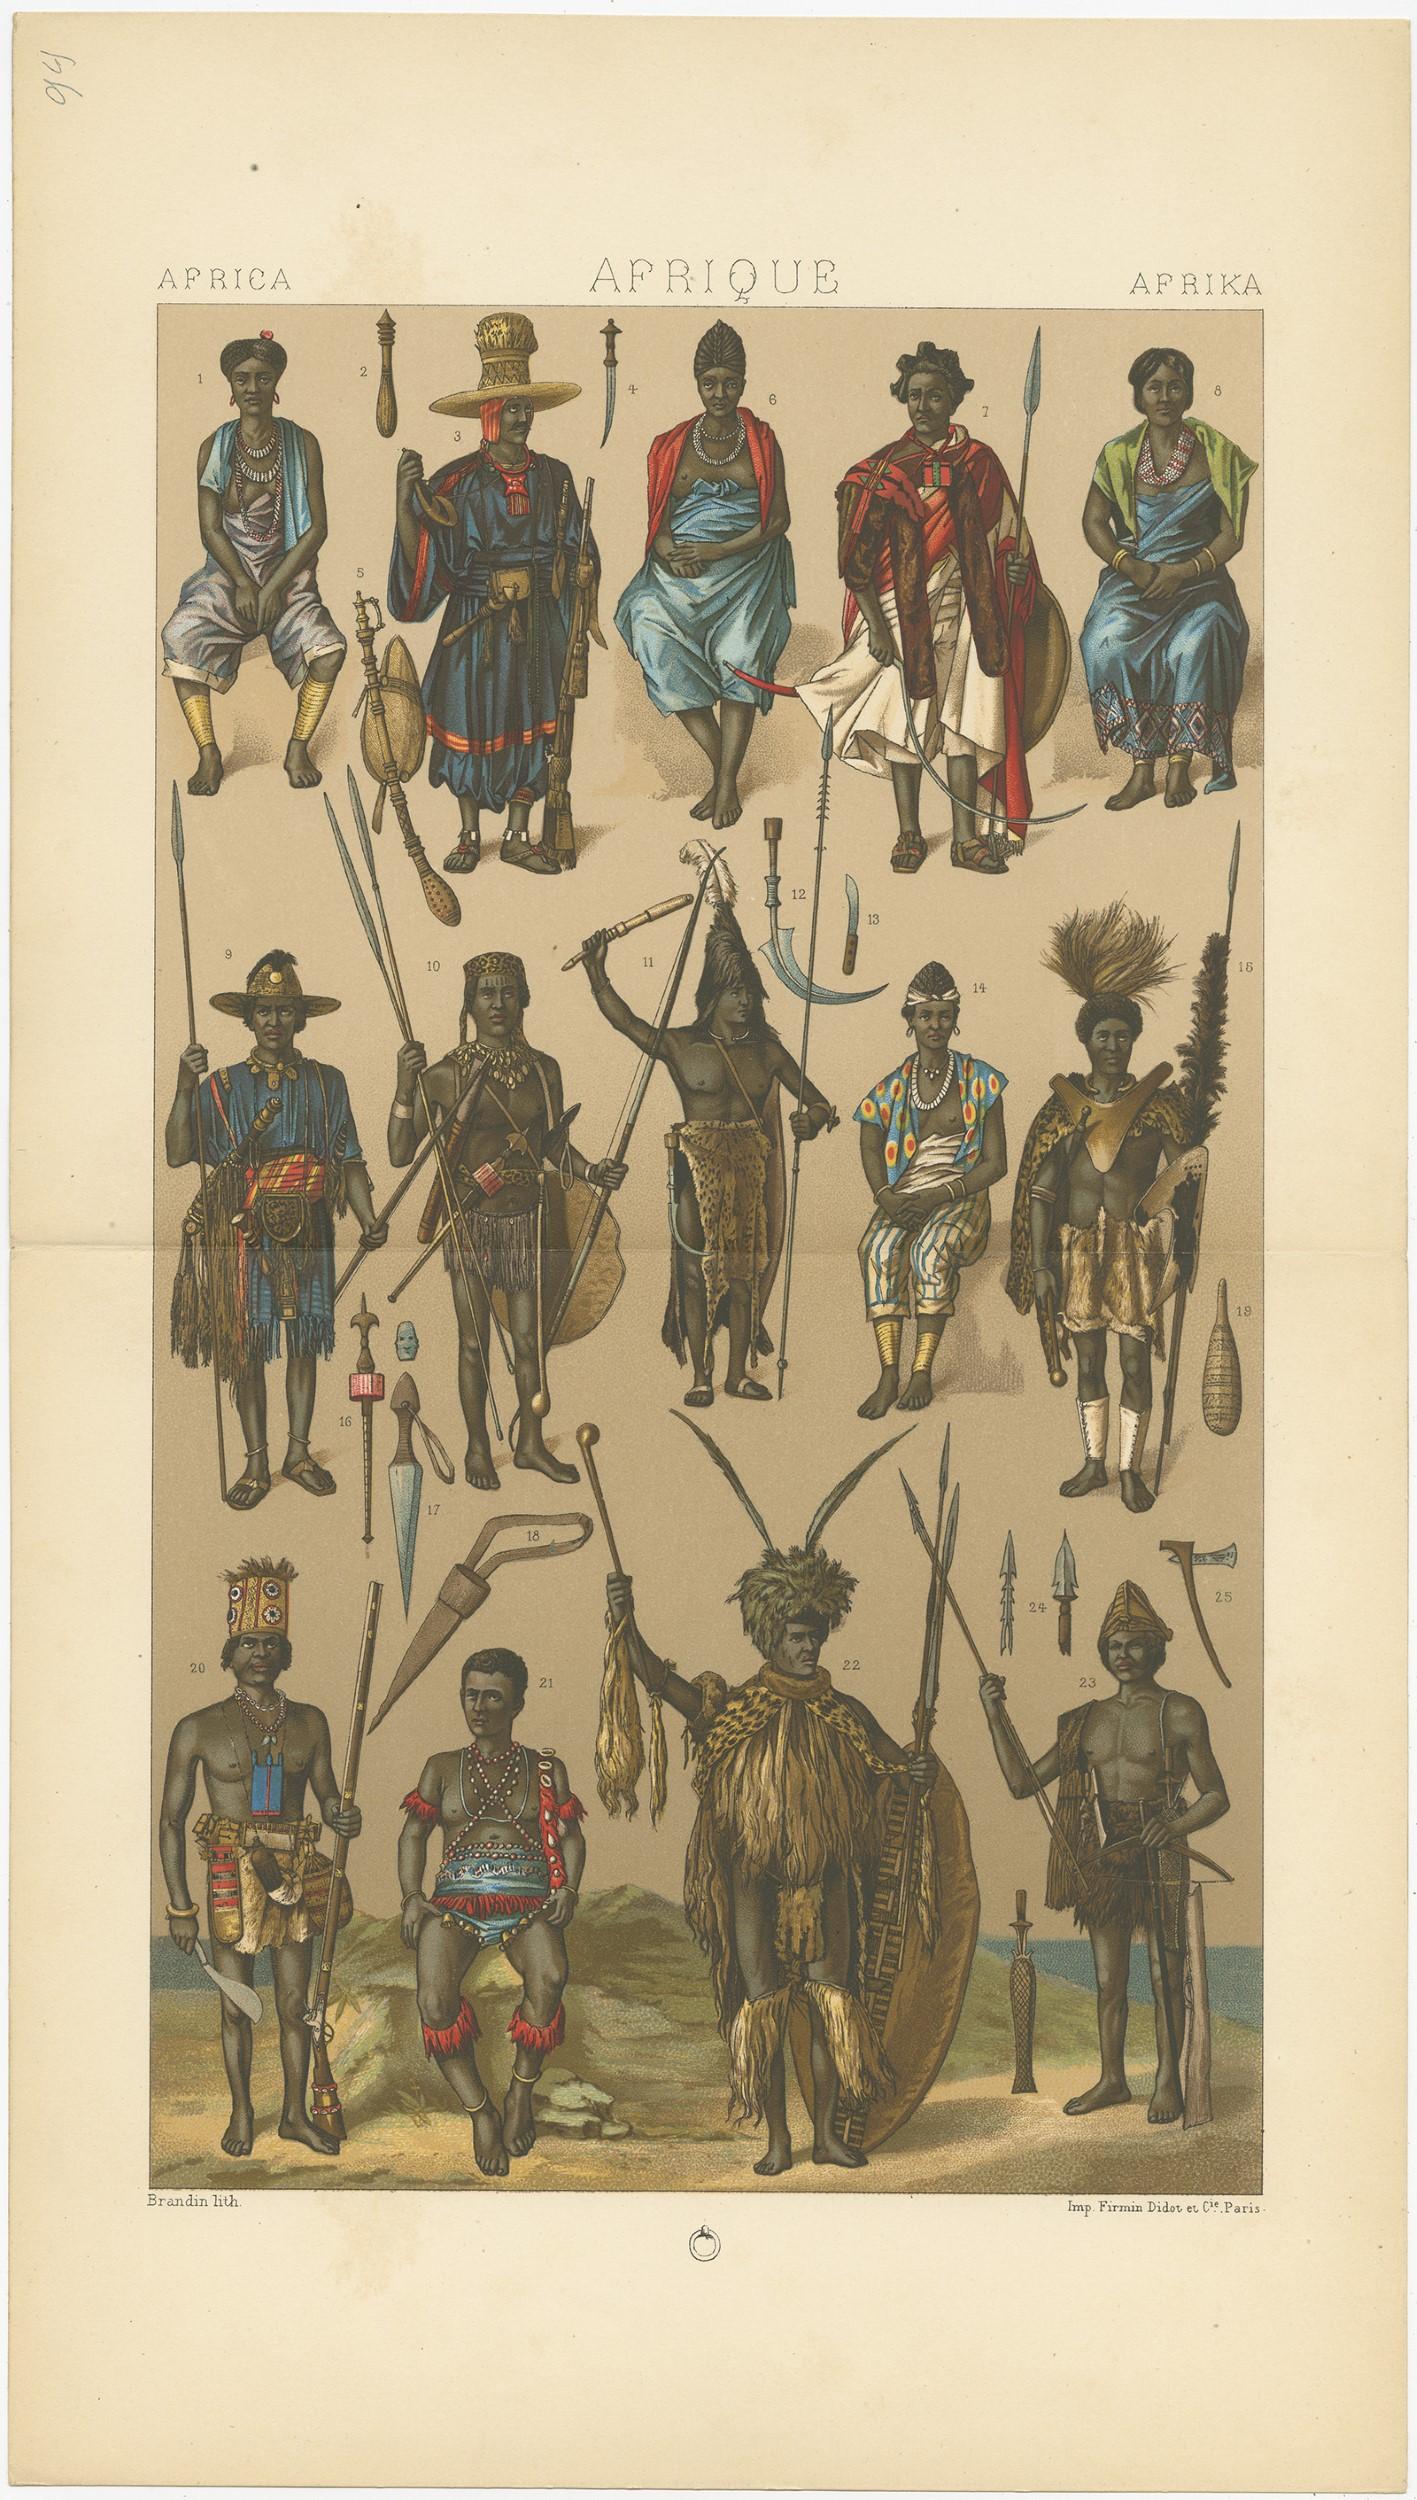 Antique print titled 'Africa - Afrique - Afrika'. Chromolithograph of African Armaments. This print originates from 'Le Costume Historique' by M.A. Racinet. Published, circa 1880.